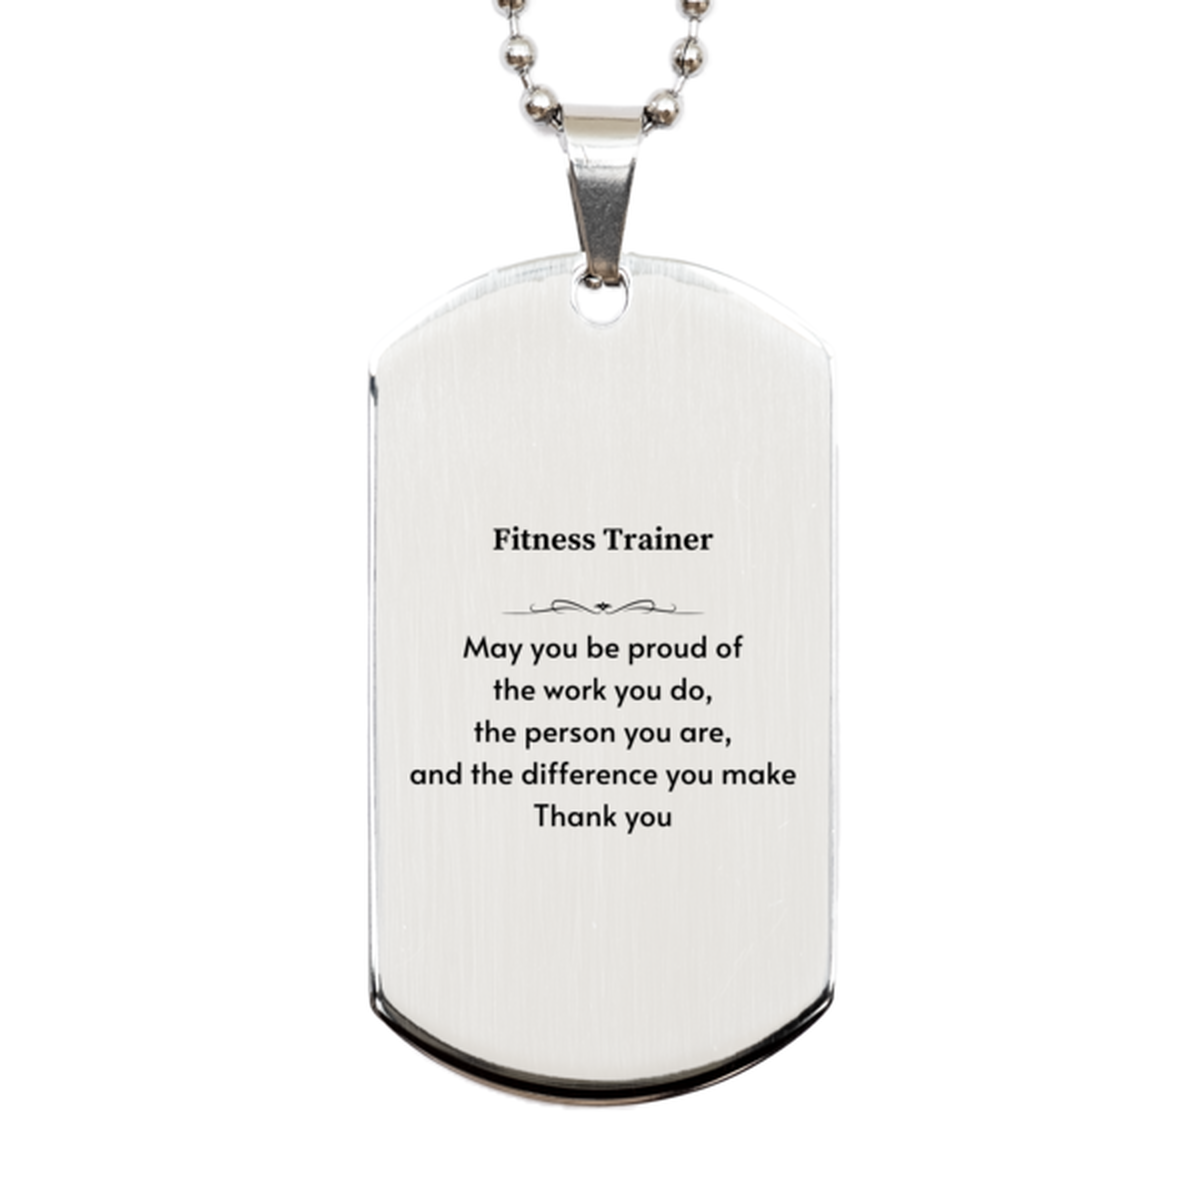 Heartwarming Silver Dog Tag Retirement Coworkers Gifts for Fitness Trainer, Fitness Trainer May You be proud of the work you do, the person you are Gifts for Boss Men Women Friends